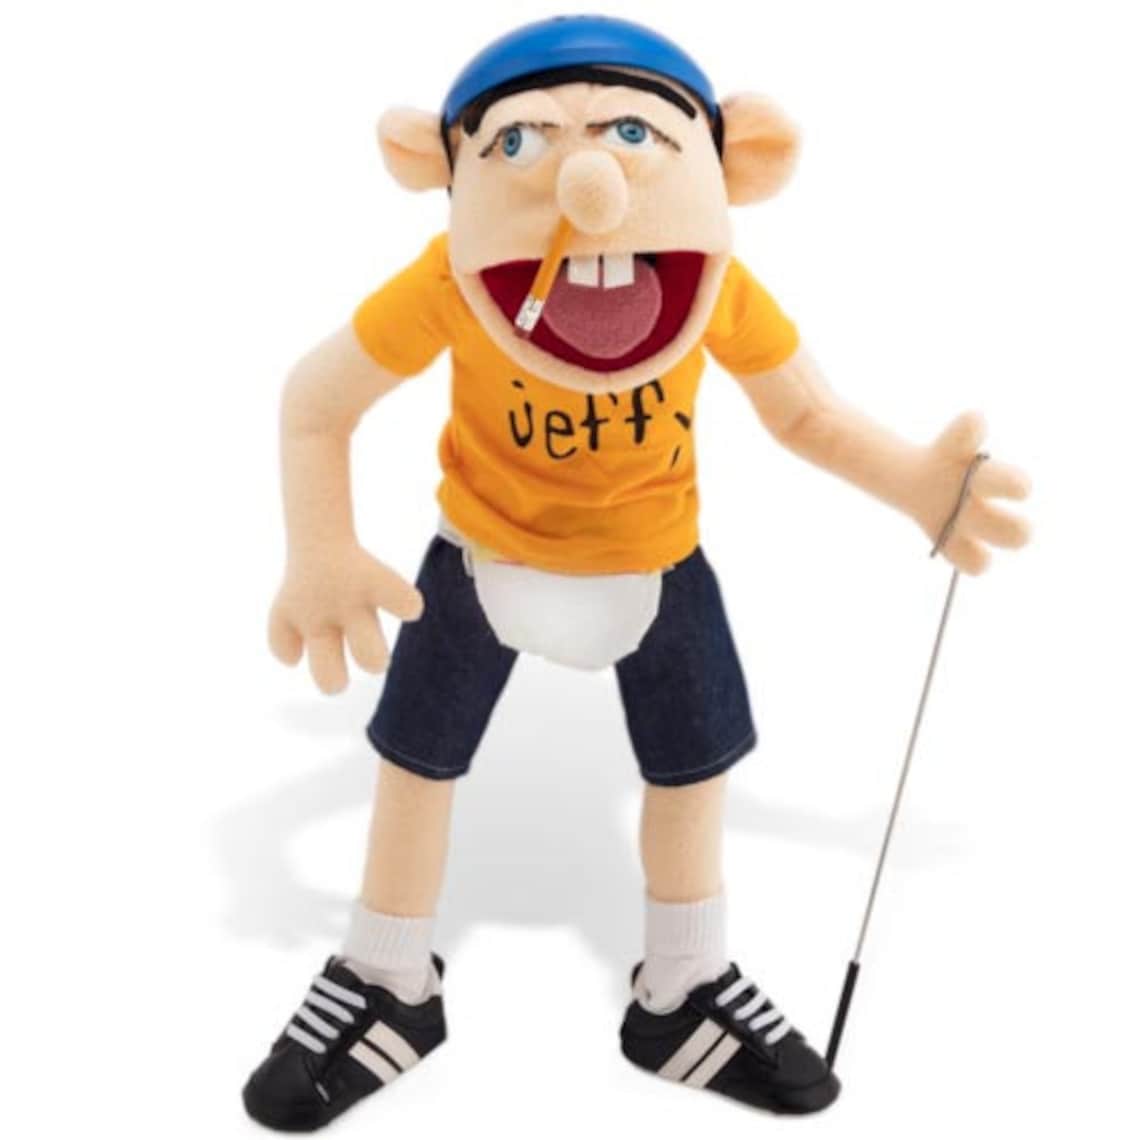 The Original Jeffy Jeffy Puppet From Youtube Movies. Made in - Etsy